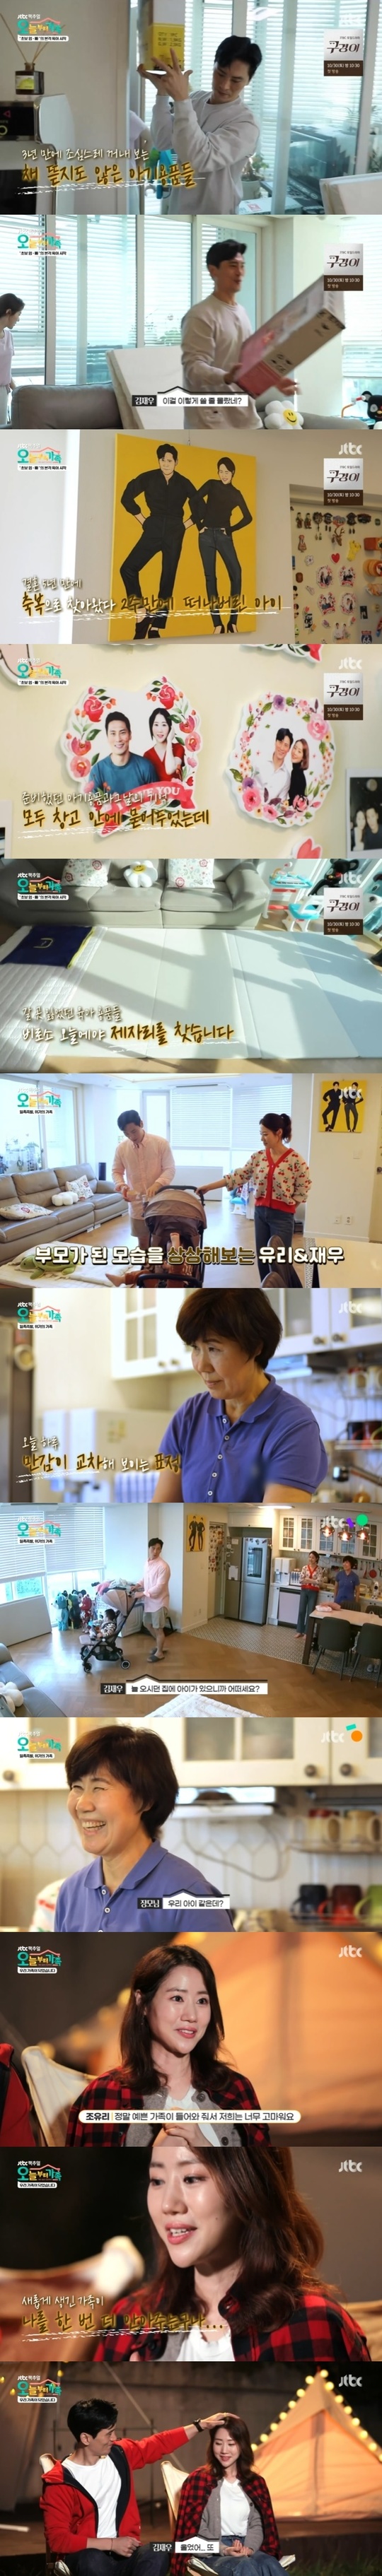 Kim Jae-u and Jo Yu-ri brought out the baby items that were being stored in the warehouse three years later.JTBC FACTUAL - Family from today, which was first broadcast on October 23, depicted the 20-year-old Irucia, Kim Jae-woo and Jo Yu-ri who met with Lee Yu-joons hat and co-parented.Kim Jae-woo and Jo Yu-ri said, There has been a lot of work over the course of 10 years.There was good things and sad things,  There was a lot of help from those who thought we were others because of the hard work.In fact, we didnt have blood, but we chose each other and became a family.I think that we can become another family of them because the family range is widening. The family members who were married to the couple were 20-year-old unmarried mother Irucia and her 15-month-old son Yu-joon, who are living with basic living expenses of about 800,000 won a month.Yoo Jun, who lives only in a space of 1 square meter for safety and a house full of dangerous junk, needed help from someone.Kim Jae-woo and Jo Yu-ri made preparations to welcome Yu Jun-yi to their home.The couple, who bought strollers, blankets and baby clothes, carefully took out baby items from the warehouse, saying, I did not know how to use this.This is the baby goods that the couple prepared for the baby who came to the couple like a miracle in five years of marriage and left in two weeks.The items that were buried in the warehouse with the memory of the day came out of the world only for Yoo Jun.Kim Jae-woo said, I have a few bucket lists, and I open the baby products in my house and write with Yoo Jun.I was thinking when I could show the baby goods that were always in my house warehouse. After giving free time to her 20-year-old mother, Irucia, who still wants to do it, they tried to raise her as best they could.Kim Jae-woo, who had been watching Yoo Jun-yi for a long time and was sleeping, expressed his satisfaction to his wife Jo Yu-ri, saying, Is not something very proud?After that, the couple who had been in the house of Irucia continued to eat late dinner.Kim Jae-woo told Irucia how she decided to give birth to a child at an early age. I think I was afraid that I could not imagine.In the meantime, Kim Jae-woo summoned Memory, who had a son in the past, saying, I had no idea about my child before that, but when I saw my son, a small switch was turned on in my heart.Before that, we were real children, but at that time it seemed like a lie, and when I saw a child who resembled me like a lie, a light turned on and brightened like a movie.I was so excited about the idea that I was a real father. Jo Yu-ri, who was listening to Kim Jae-woos words with a complicated expression, also expressed his hidden mind: In the past, it was too hard to see a child, so I avoided meeting with a friend with a child.However, After a while, I thought it was not inevitable, he said. If I can help, I should give it to me and I met Yu Jun.I hope Yoo Jun is happier. Since then, the couple has been spending time with Yoo Jun and has been playing SOS on her mother when she has had a hard time.And my mother-in-law said, I wanted to try that.I put an Americano in a cup holder and take a walk with the baby. He gave me a sad feeling to look at his son-in-law, Kim Jae-woo, who is rolling a stroller with Yu Jun.My mother-in-law laughed when asked, How about having a child in the house you always came to?Jo Yu-ri, who is on the air, said, Thank you for coming in with a beautiful family in the life of my old aunt and uncle. I hope you will call me aunt when Yujun is 20 years old and 30 years old.I want to hug my new family once more. Kim Jae-woo said, I cried again. I took care of Jo Yu-ri, who was blushing, and gave me a hearty feeling to the end.